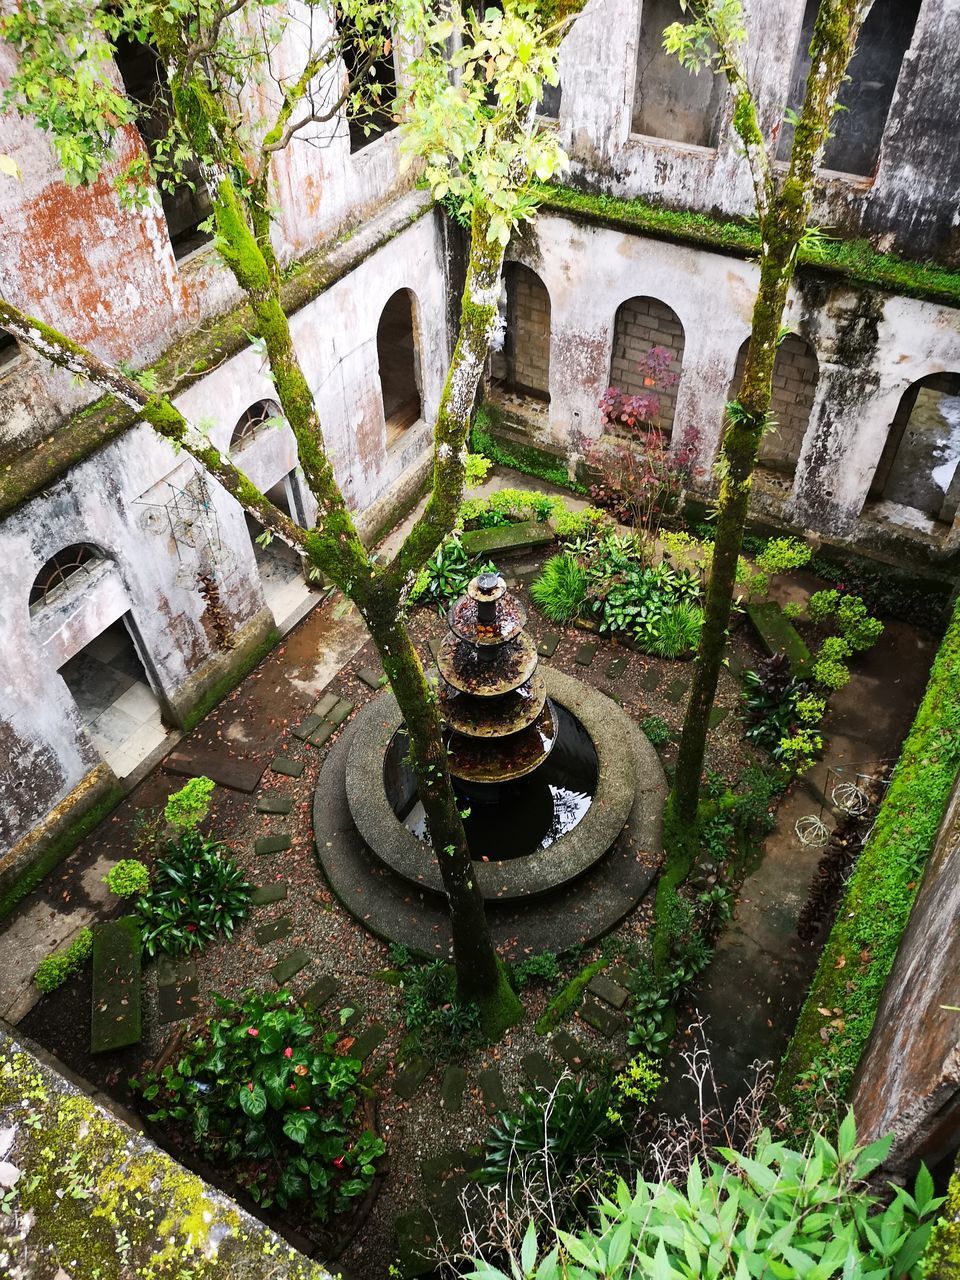 HIGH ANGLE VIEW OF ABANDONED BUILDING